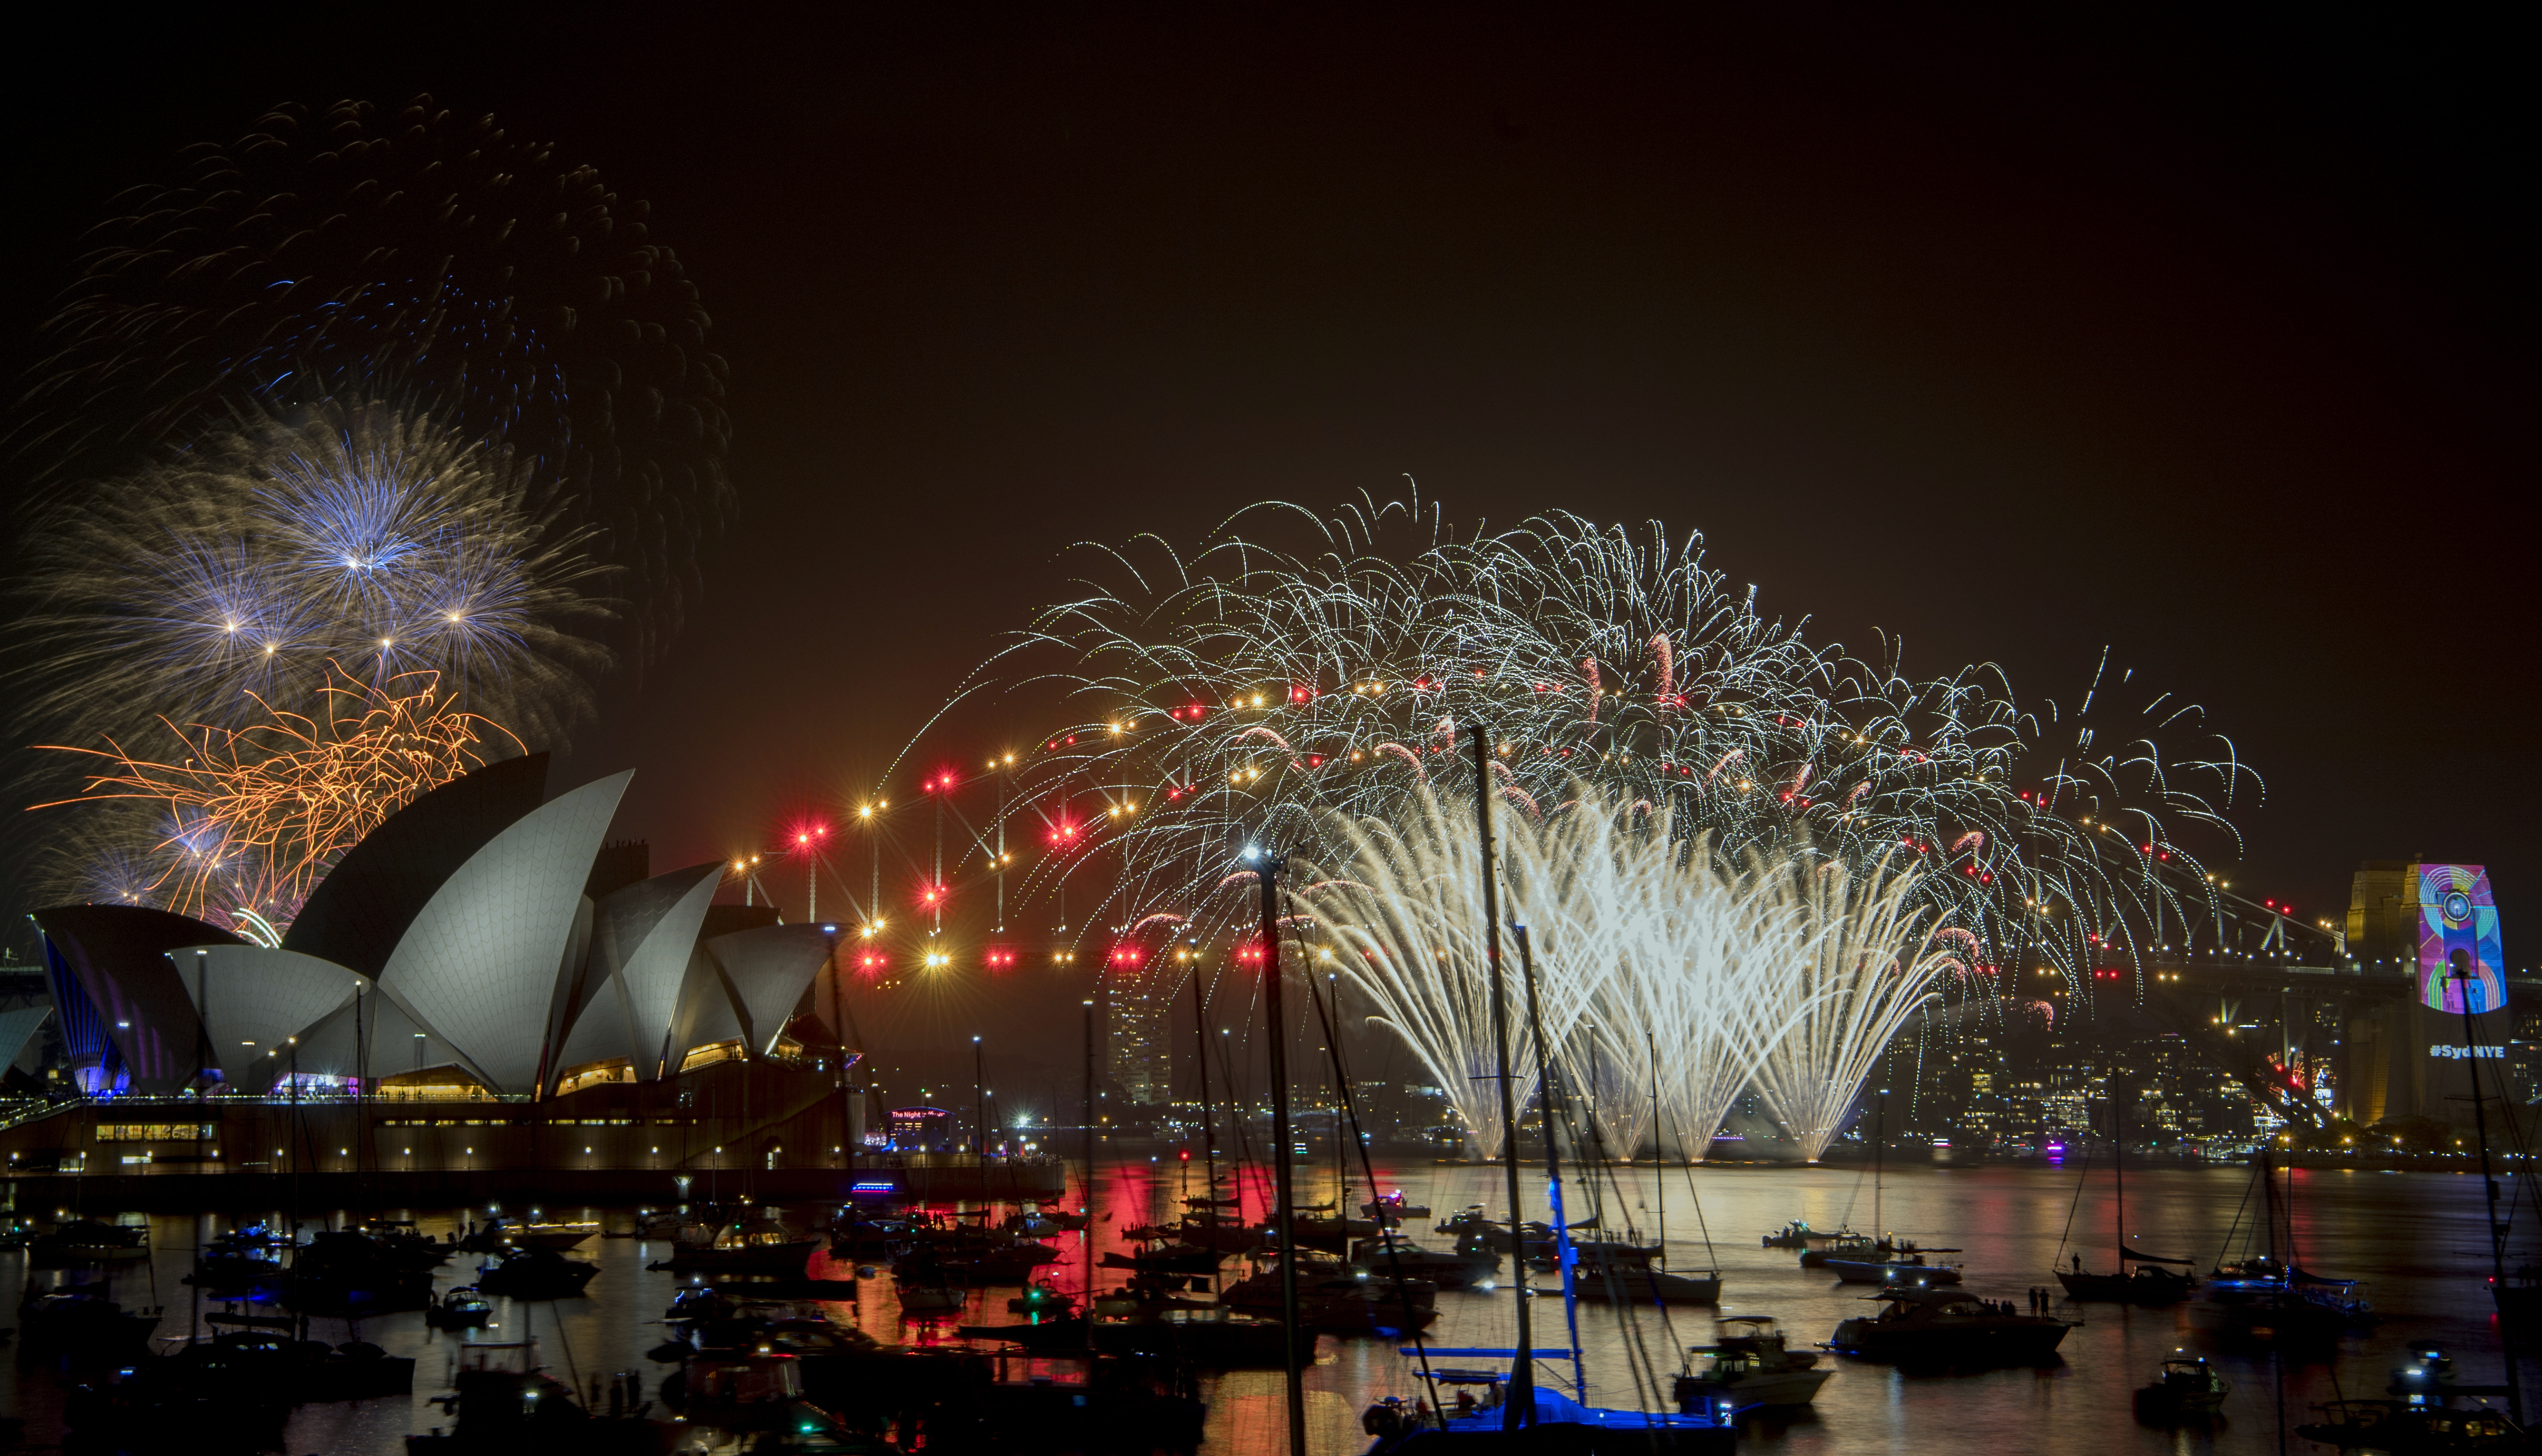 Fireworks explode over the Sydney Harbour during New Year's Eve celebrations in Sydney